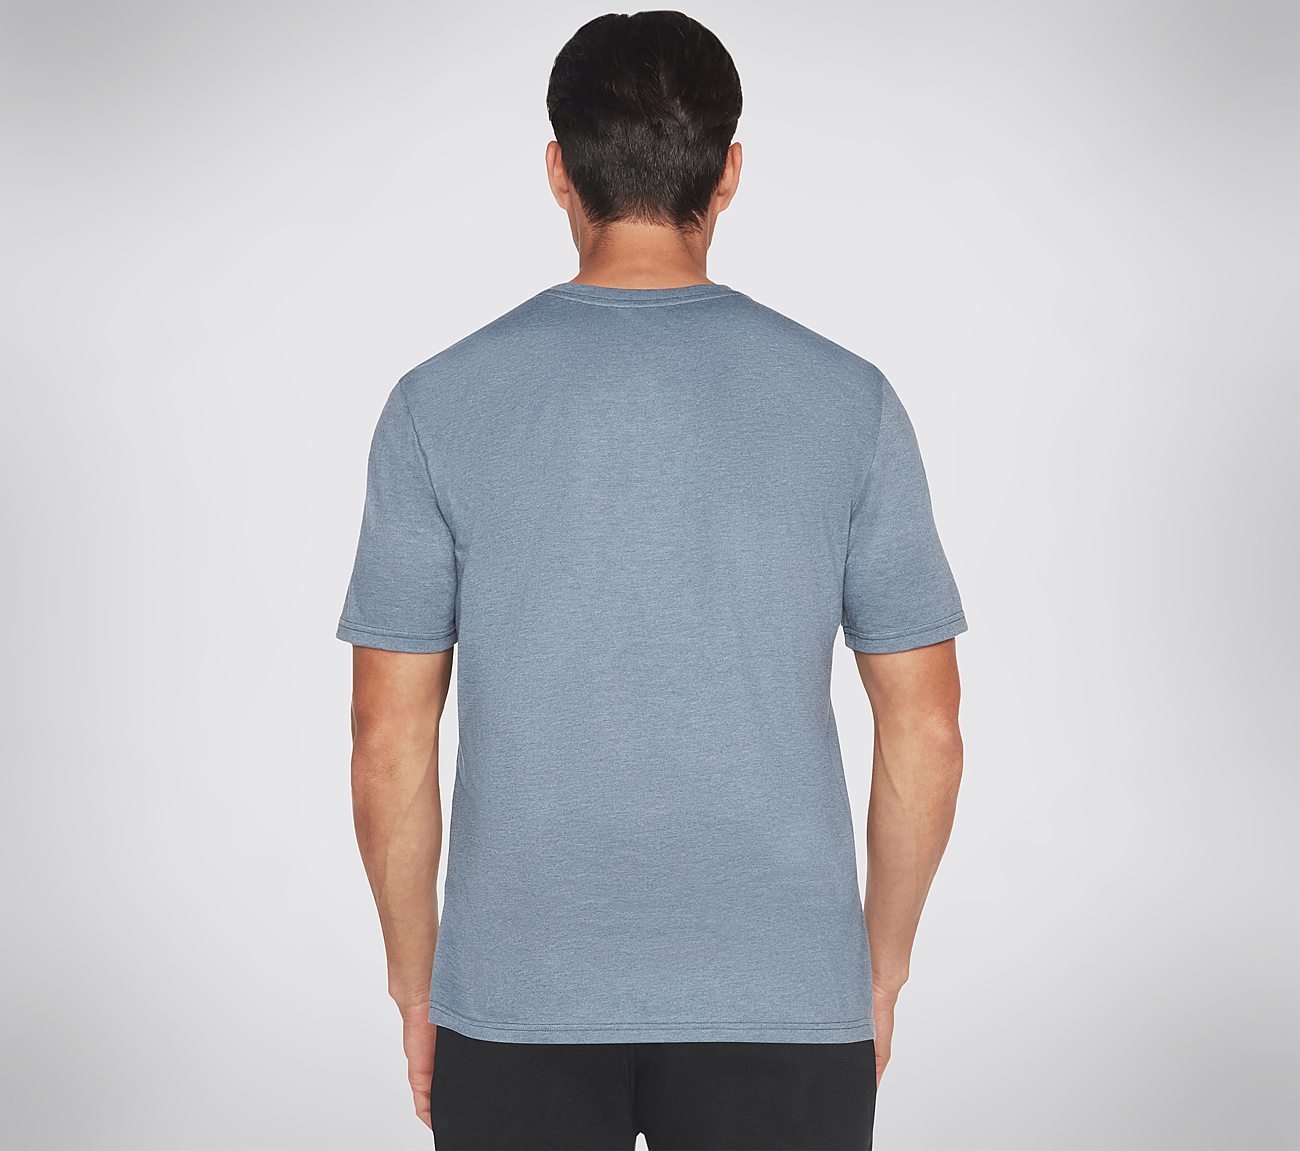 MOTION TEE, BLUE/GREY Apparels Top View